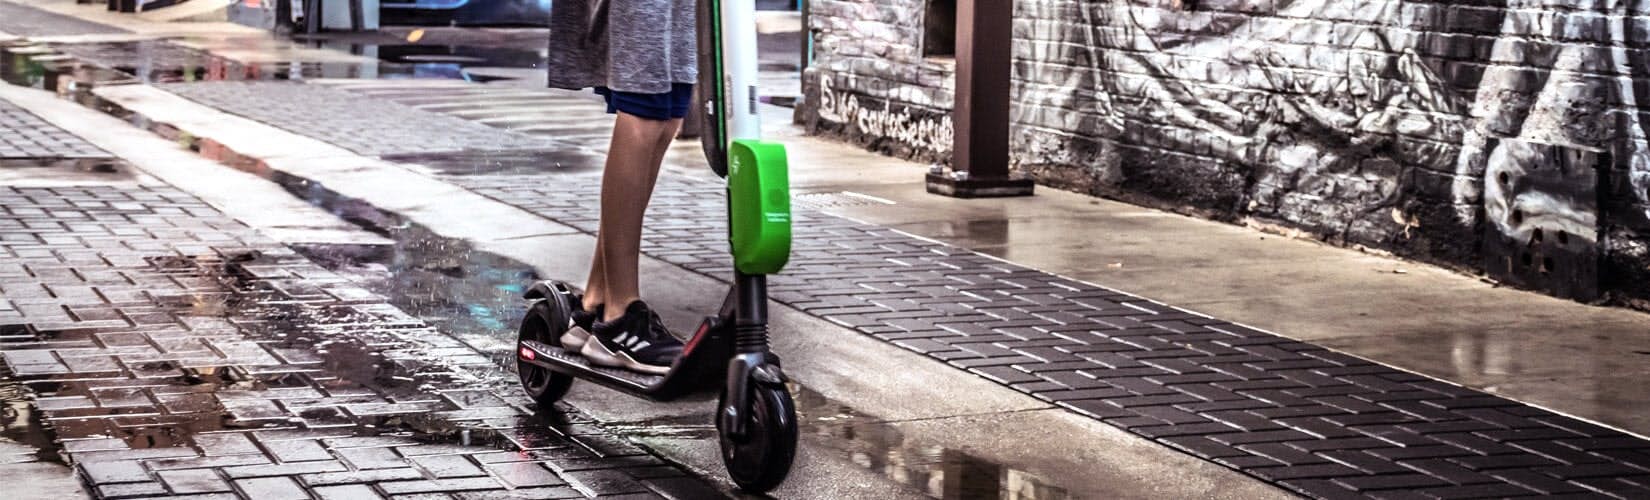 Lime Electric Scooter Recall May Lead to Litigation Explosion